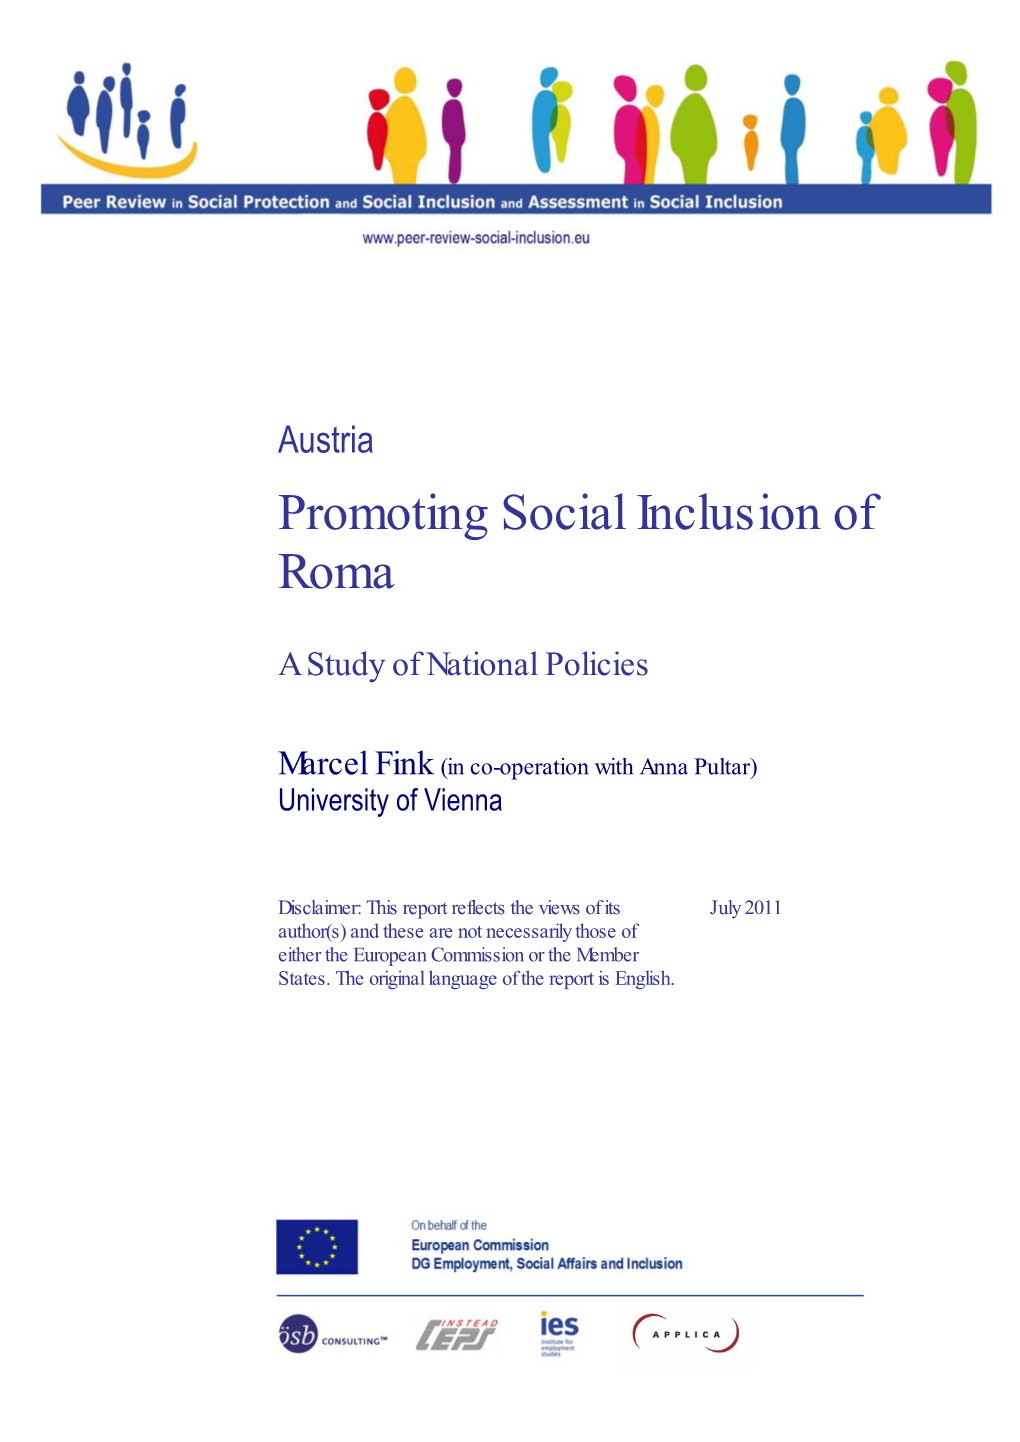 Promoting the Social Inclusion of Roma